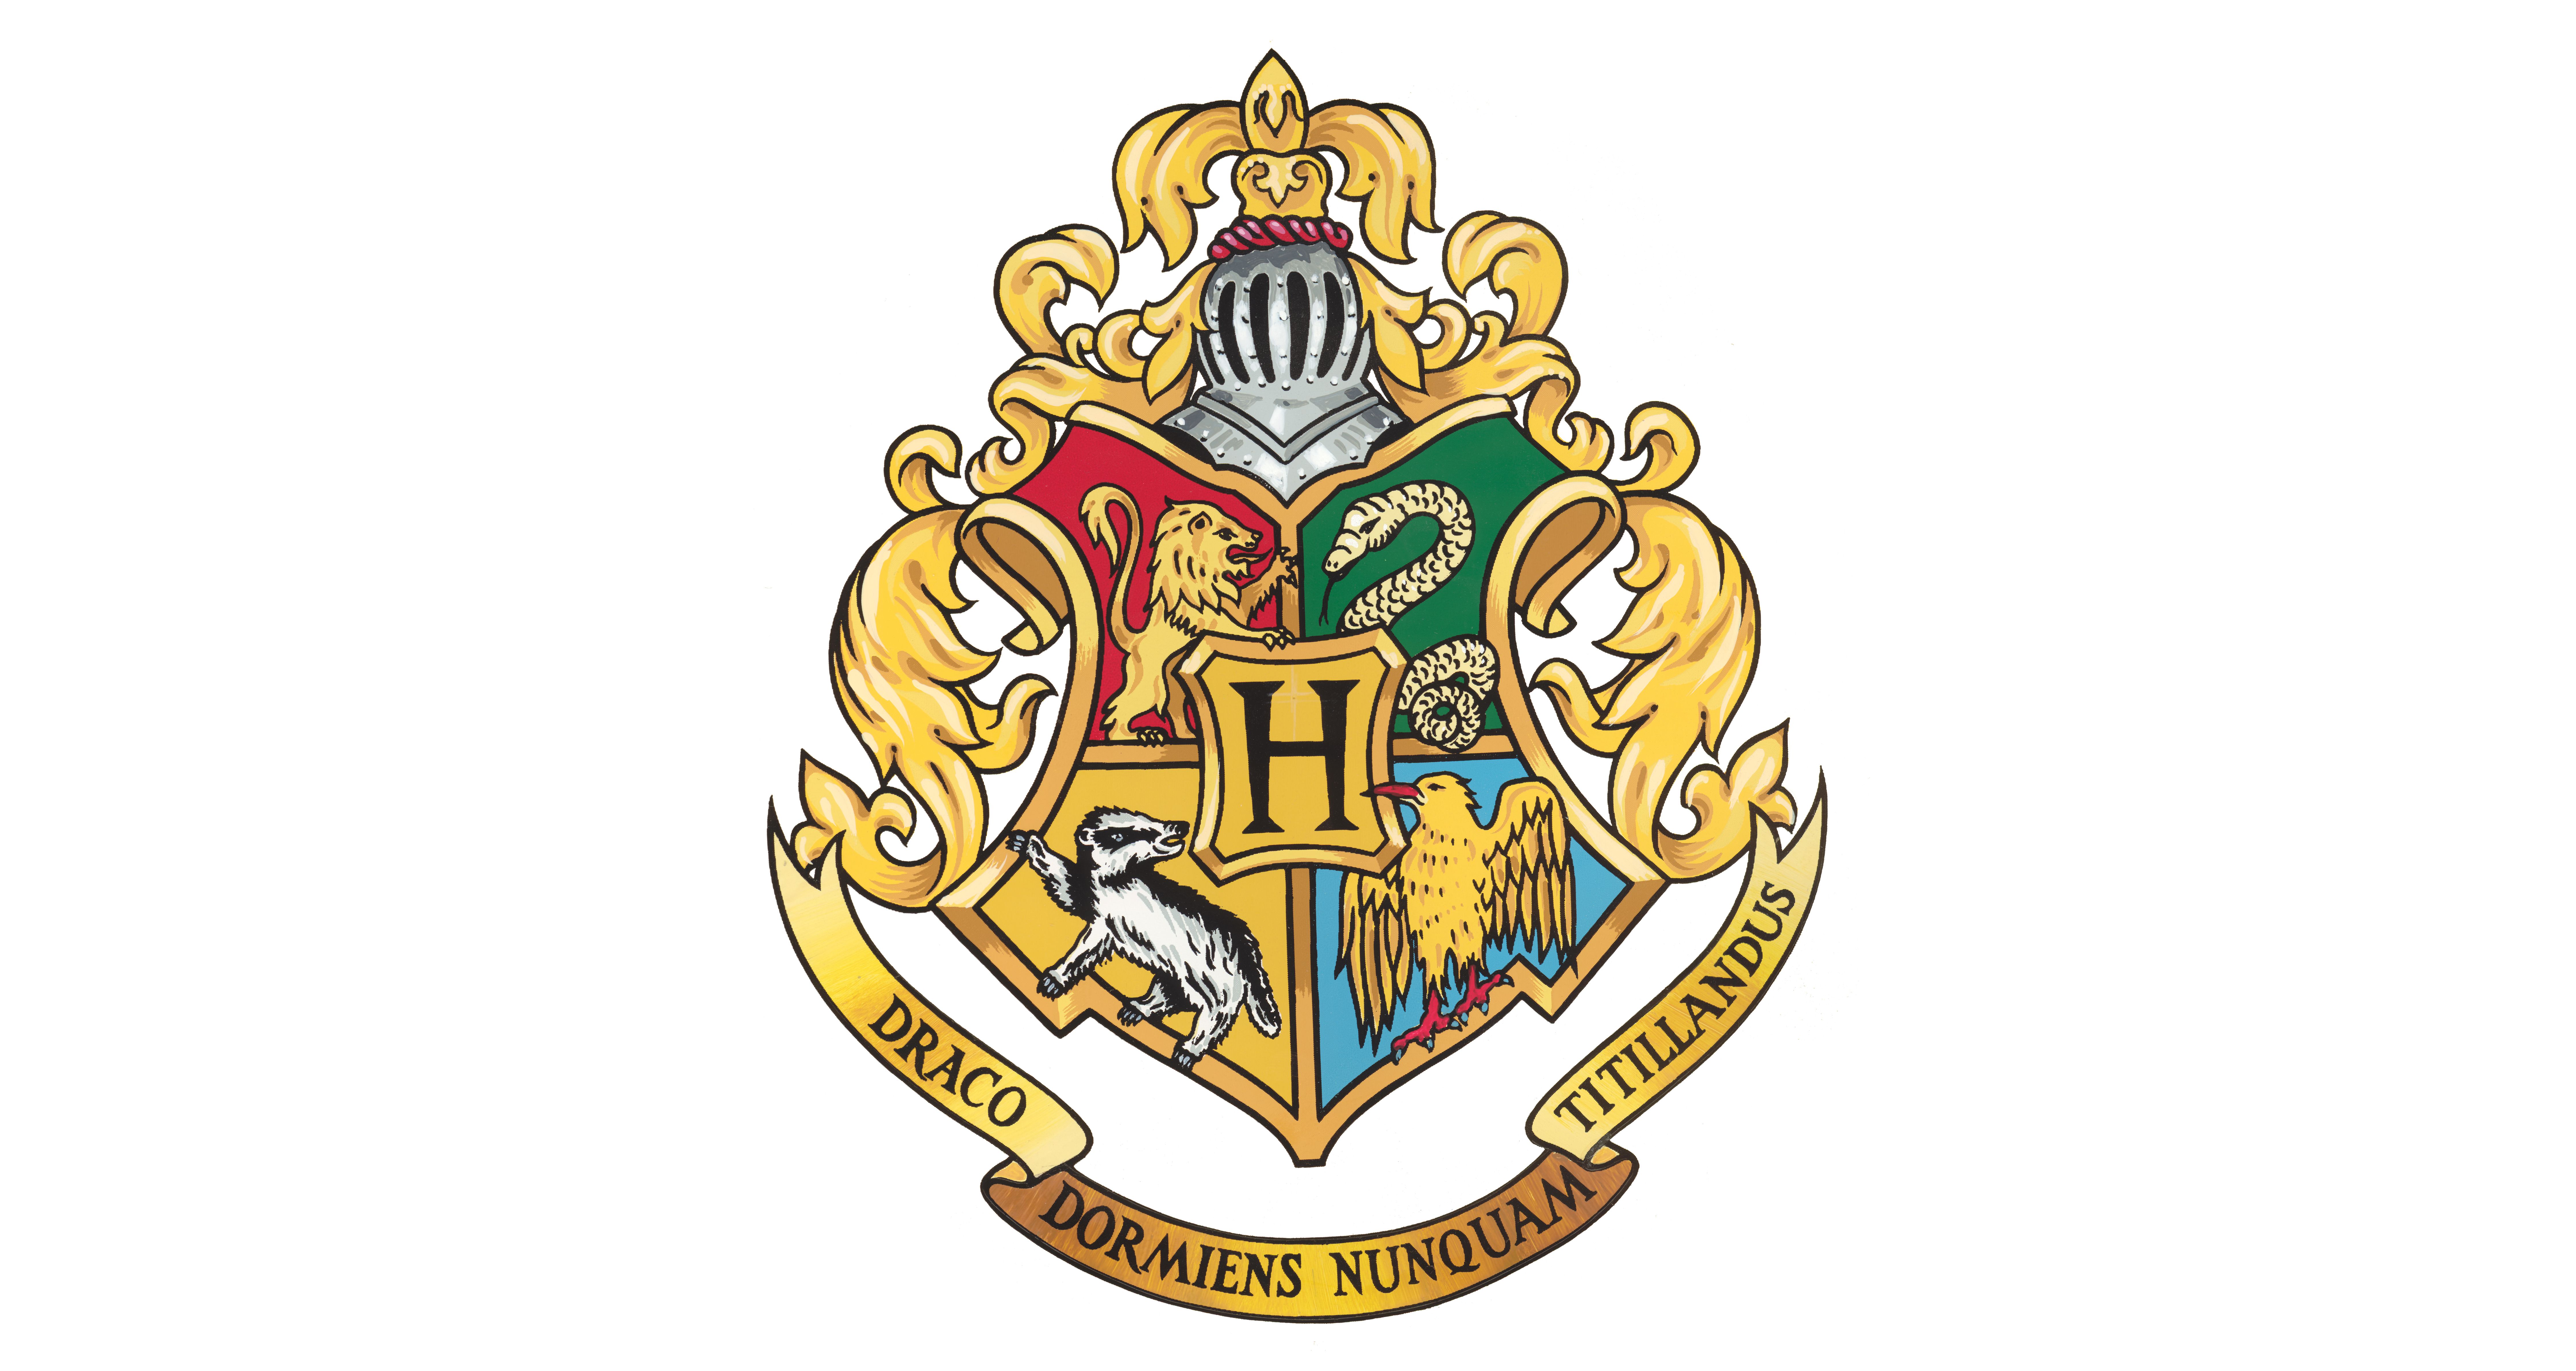 The MACUSA seal and other emblems of the wizarding world